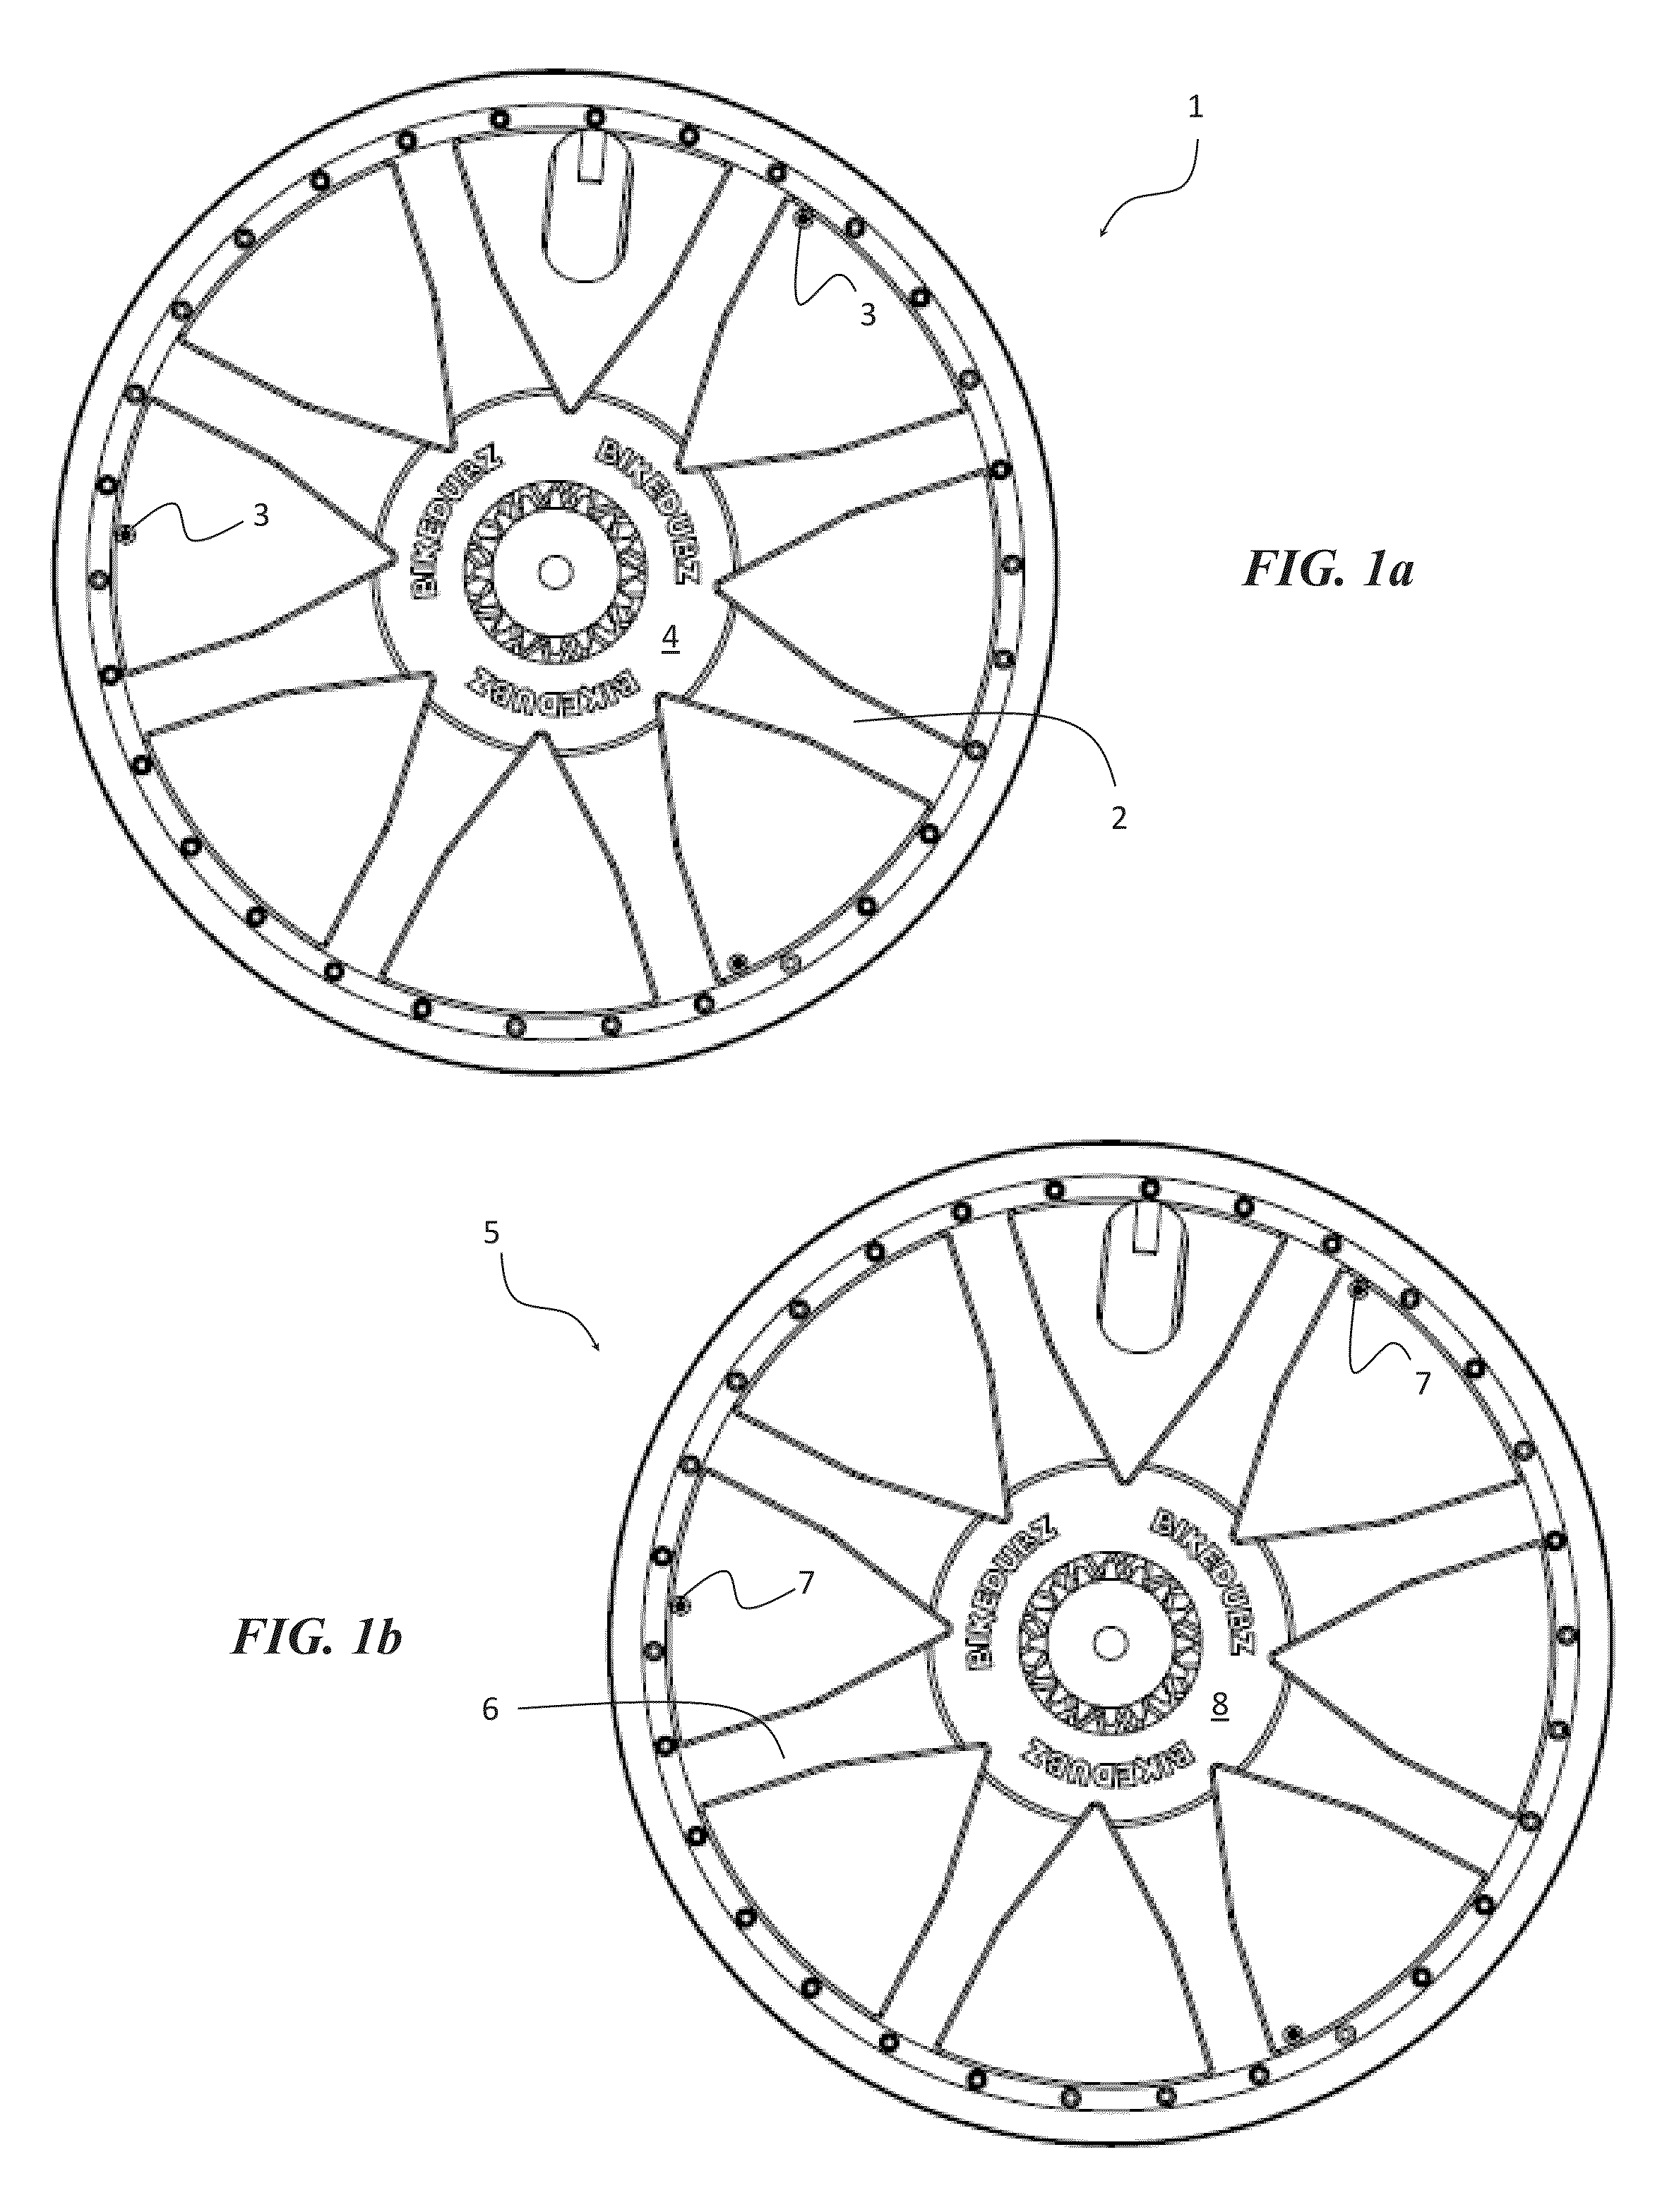 Wheel cover assembly